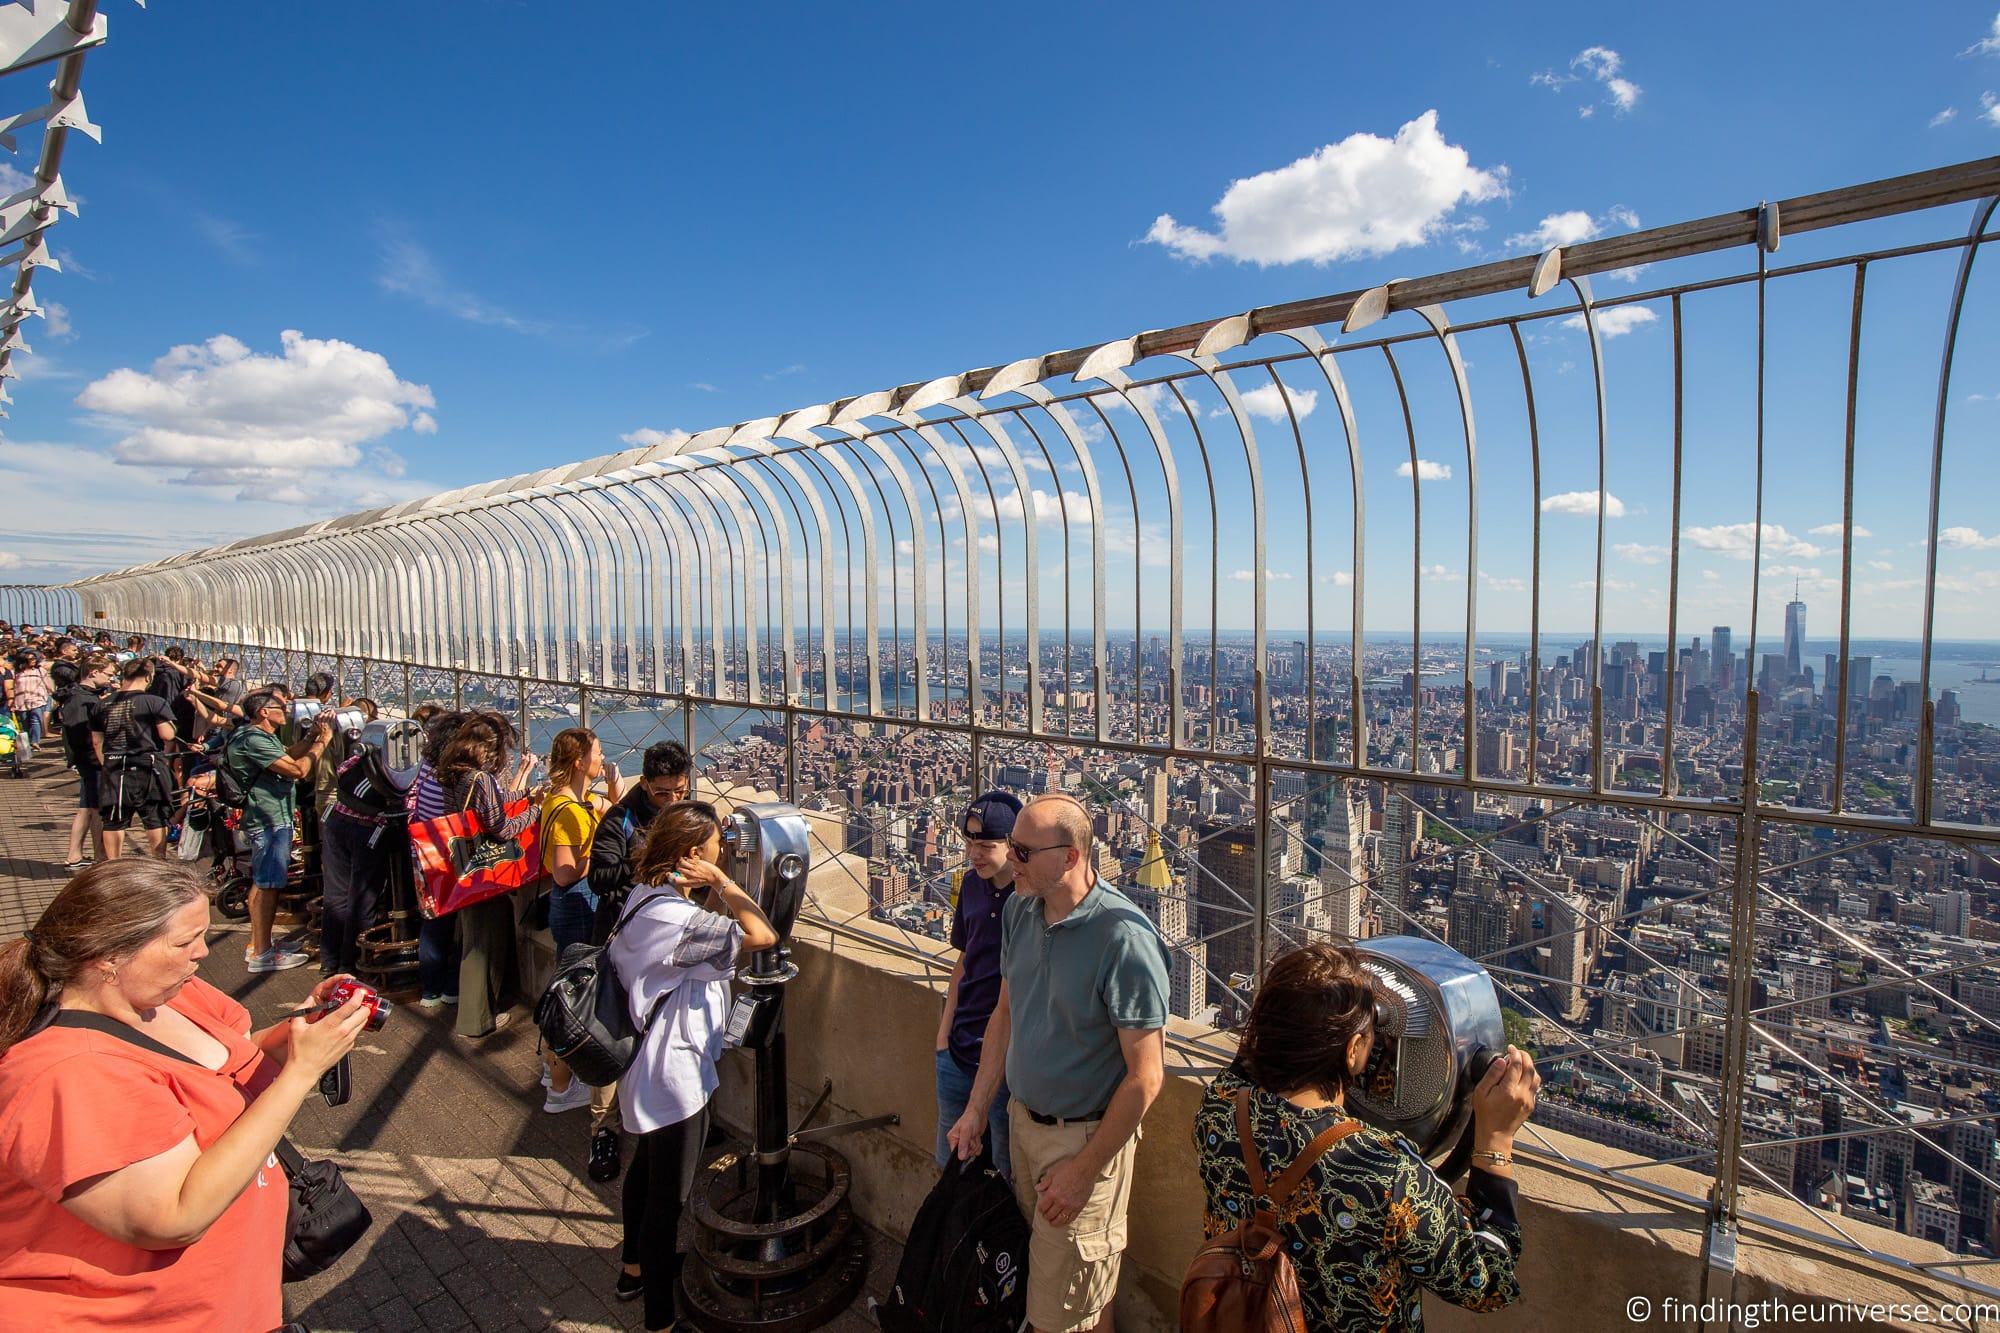 why do tourists visit the empire state building